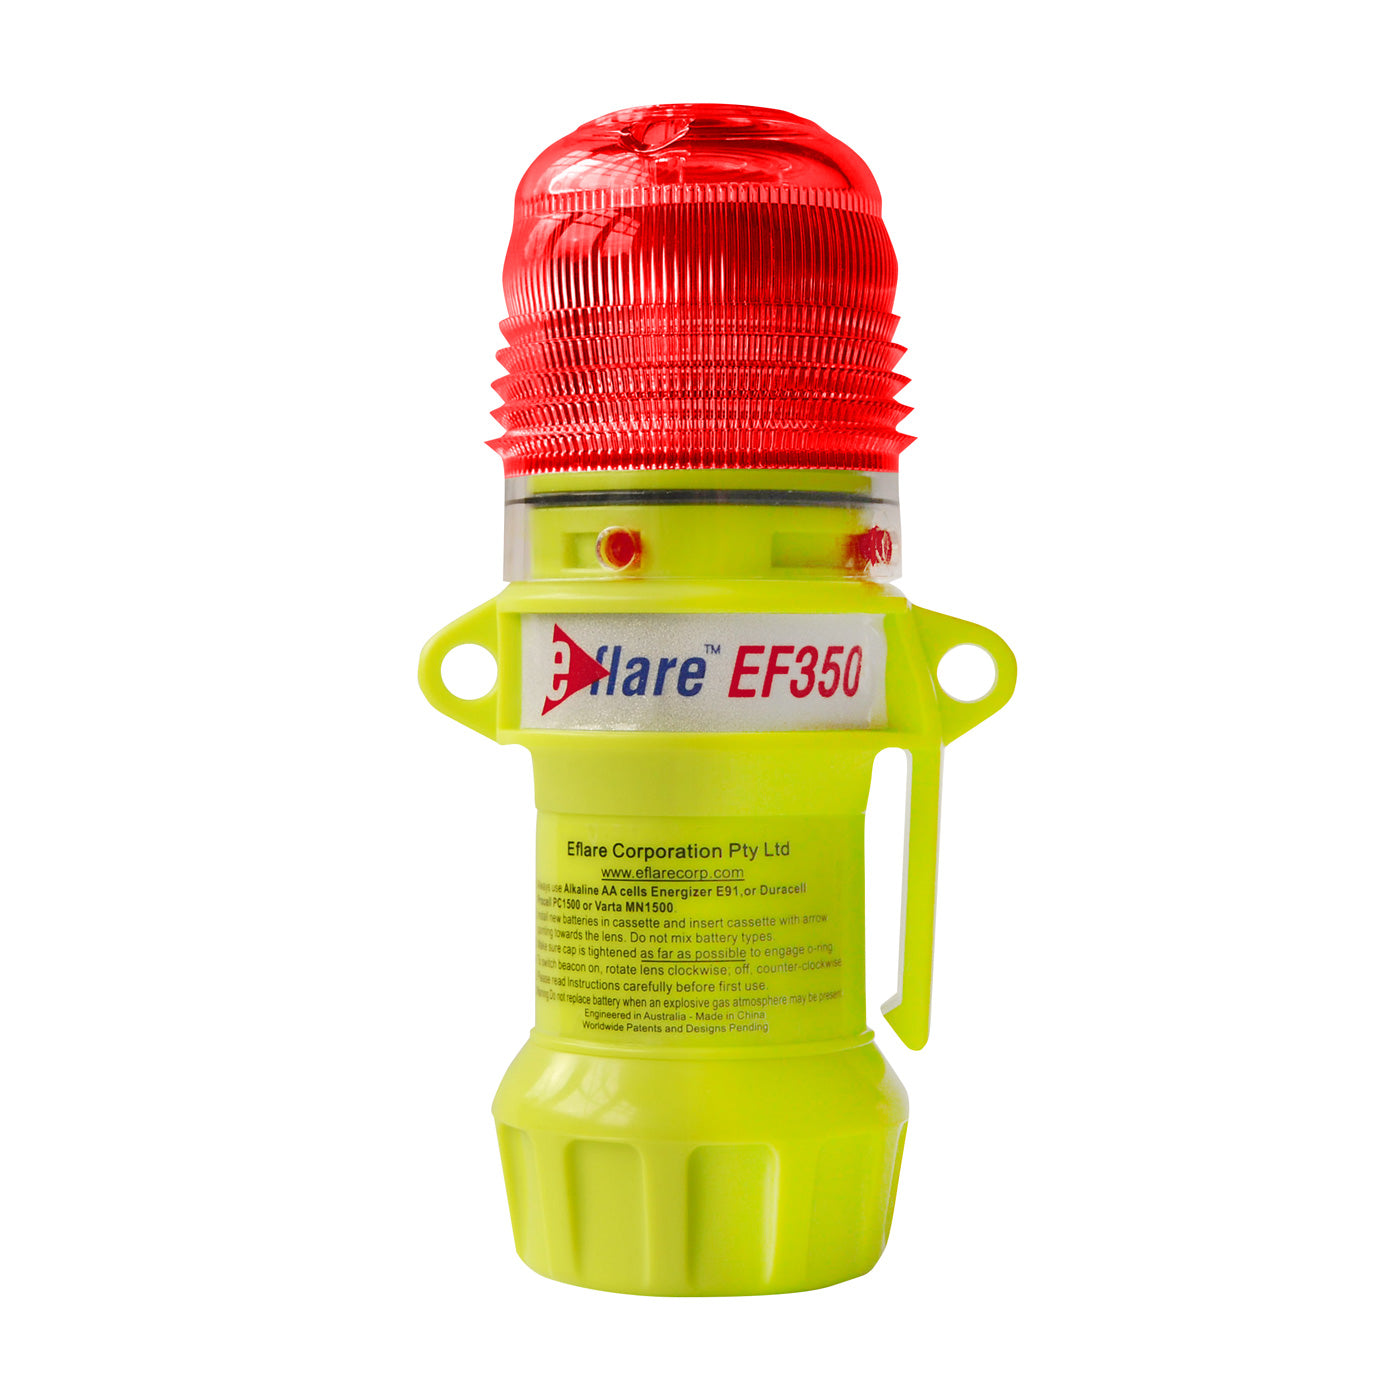 Protective Industrial Products-E-FLARE SAFETY & EMERGENCY BEACON-eSafety Supplies, Inc